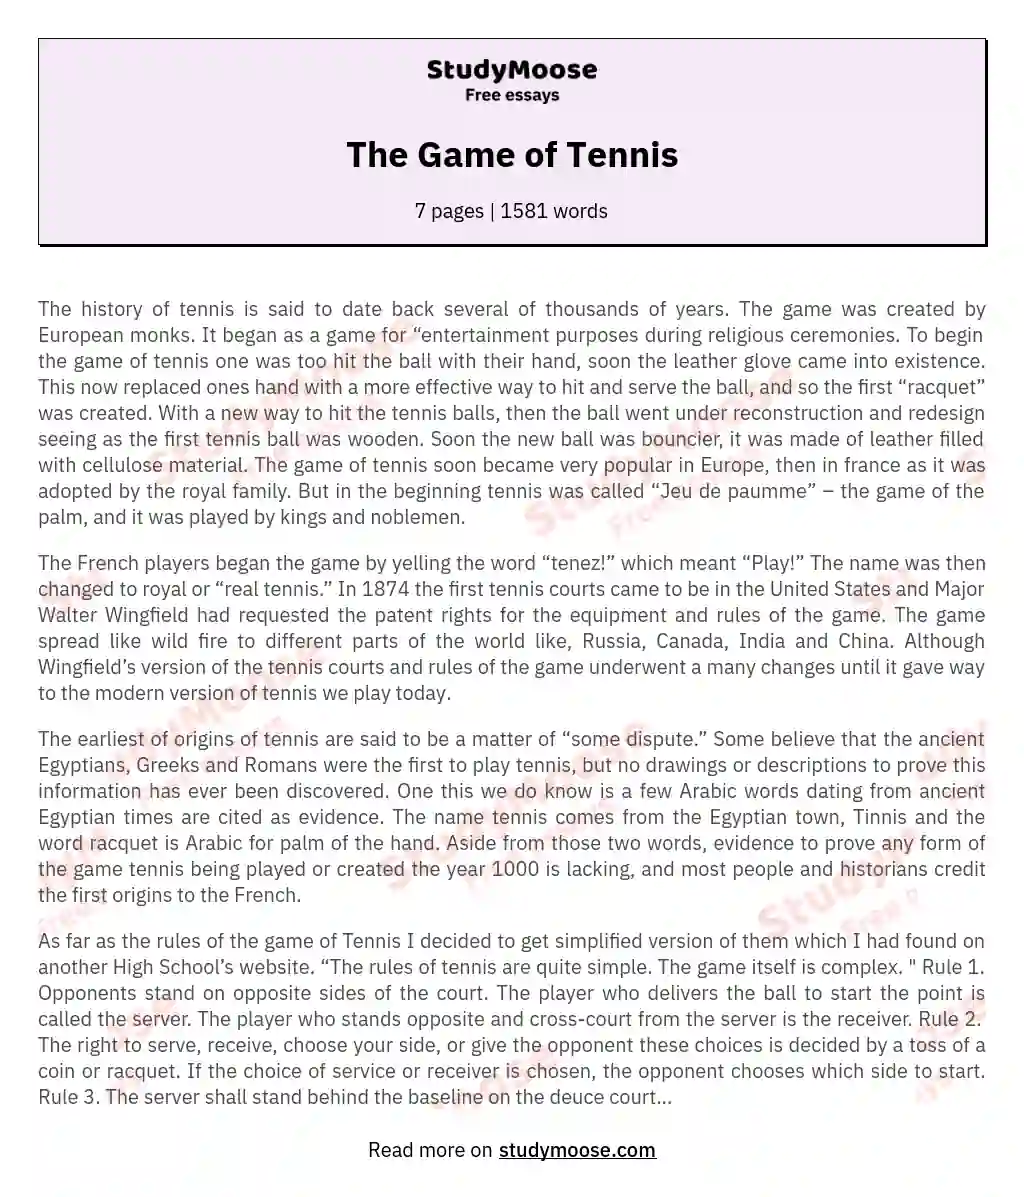 The Game of Tennis essay